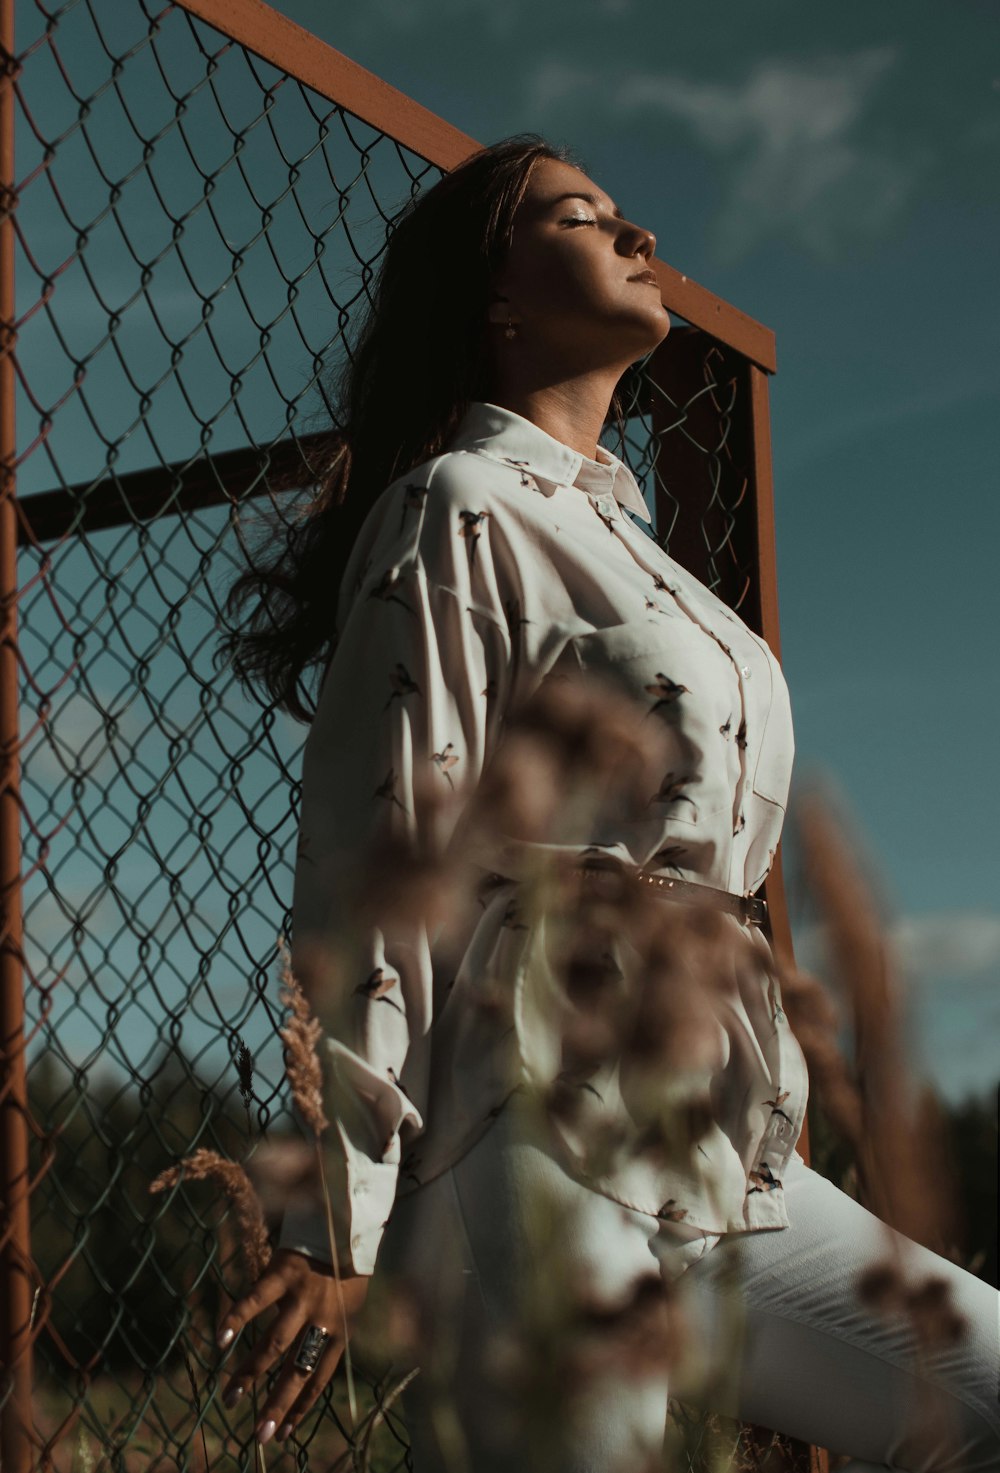 woman wearing white blouse leaning on fence